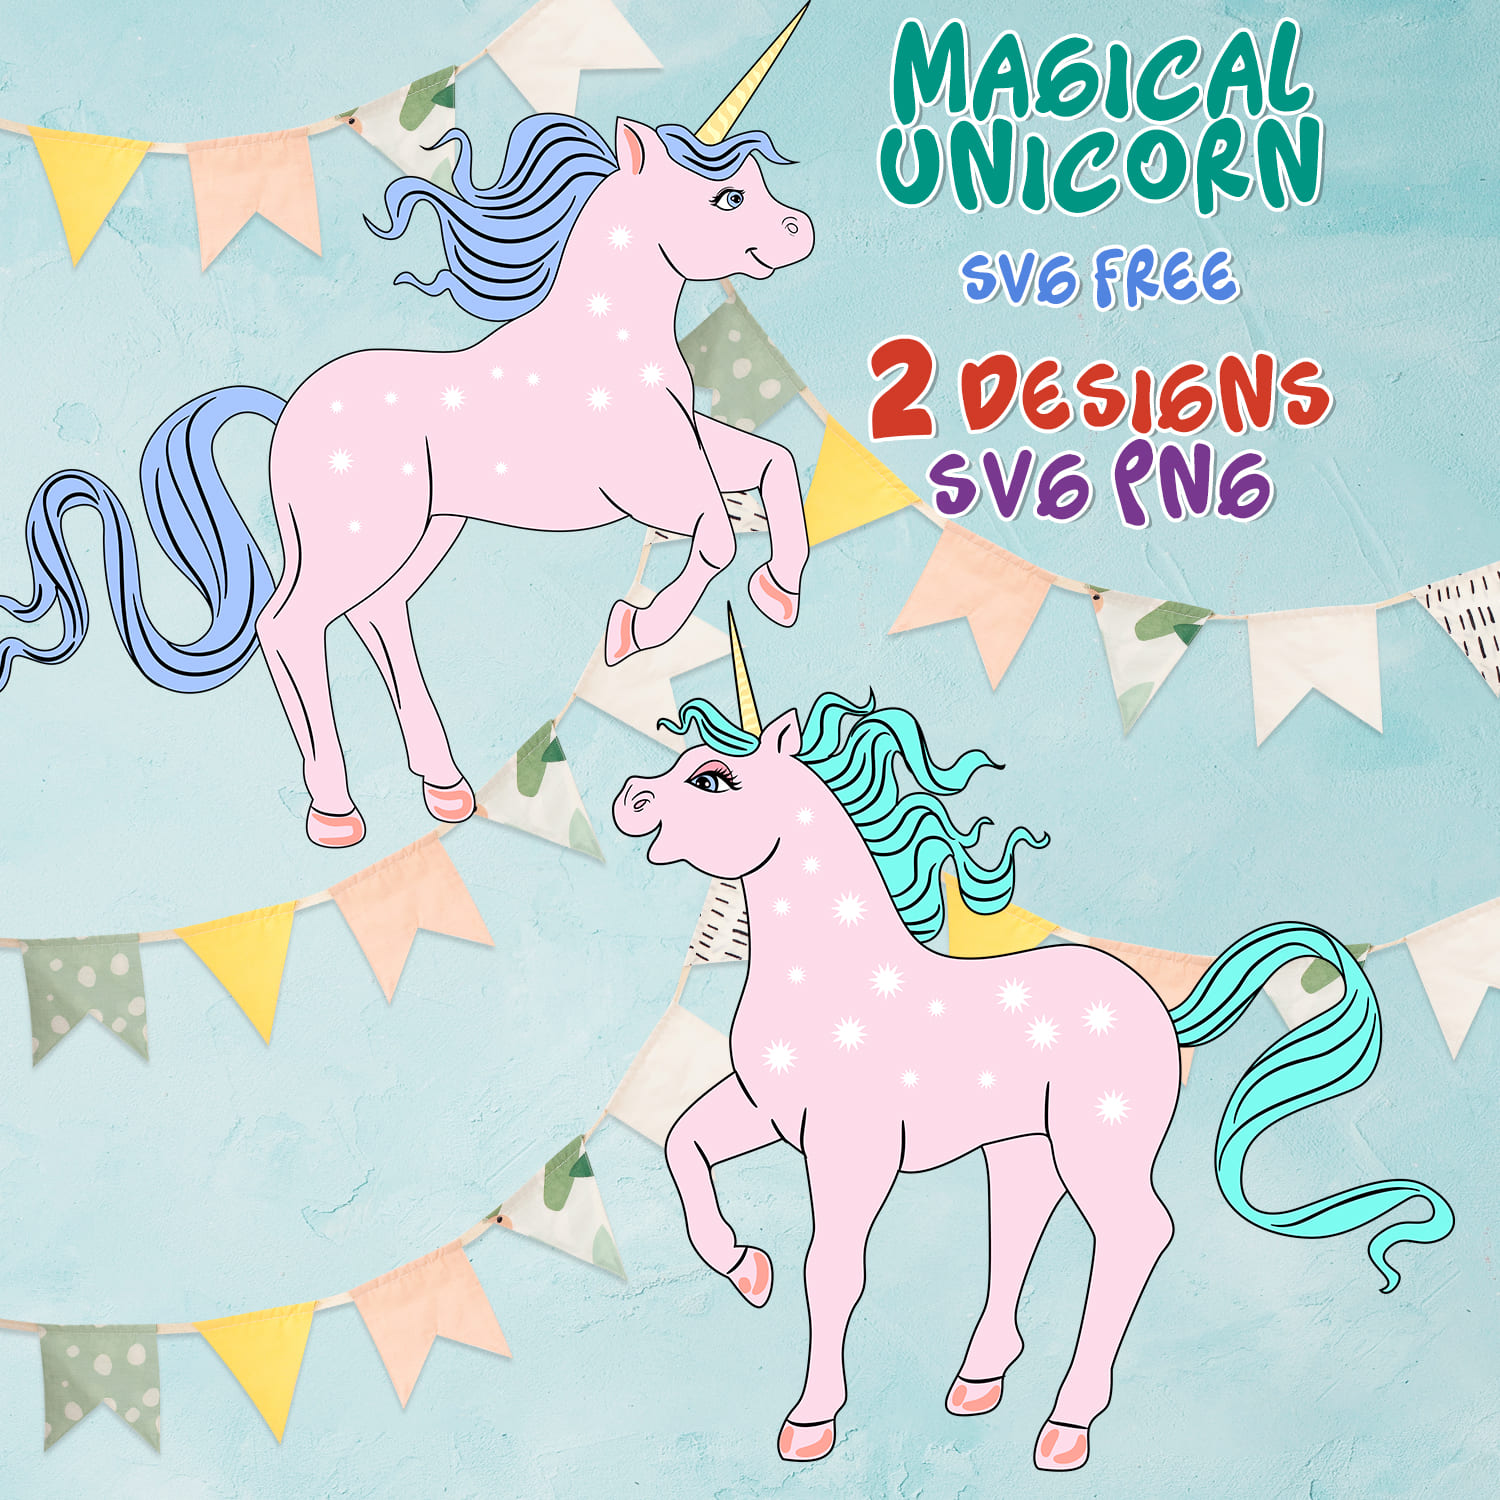 Magical Unicorn SVG Free - main image preview.